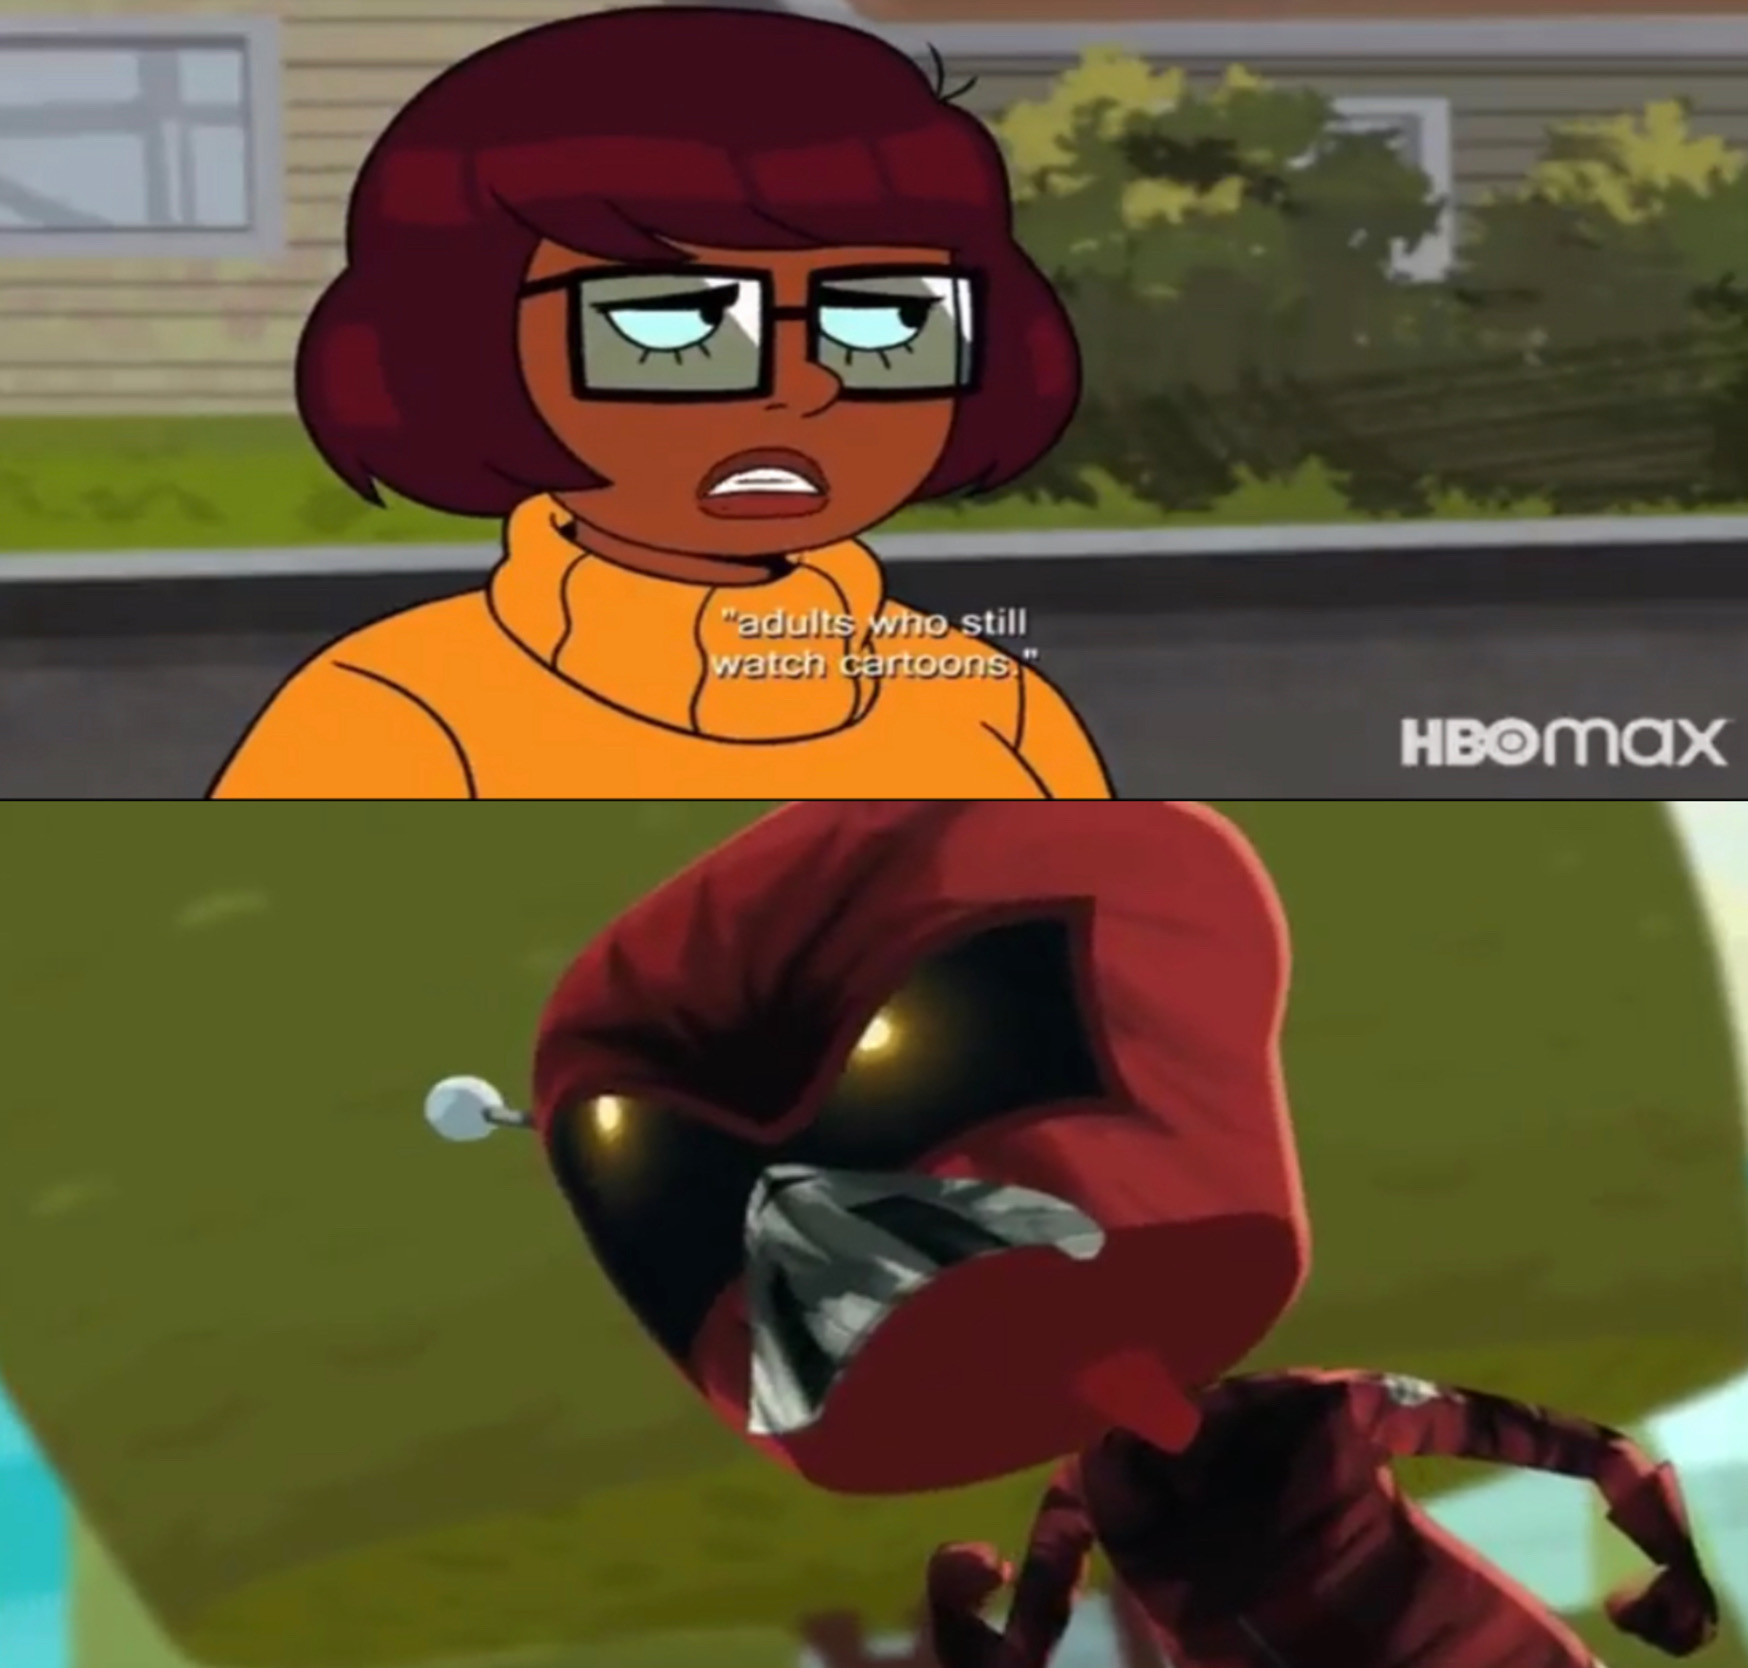 Why do people hate Velma so much?